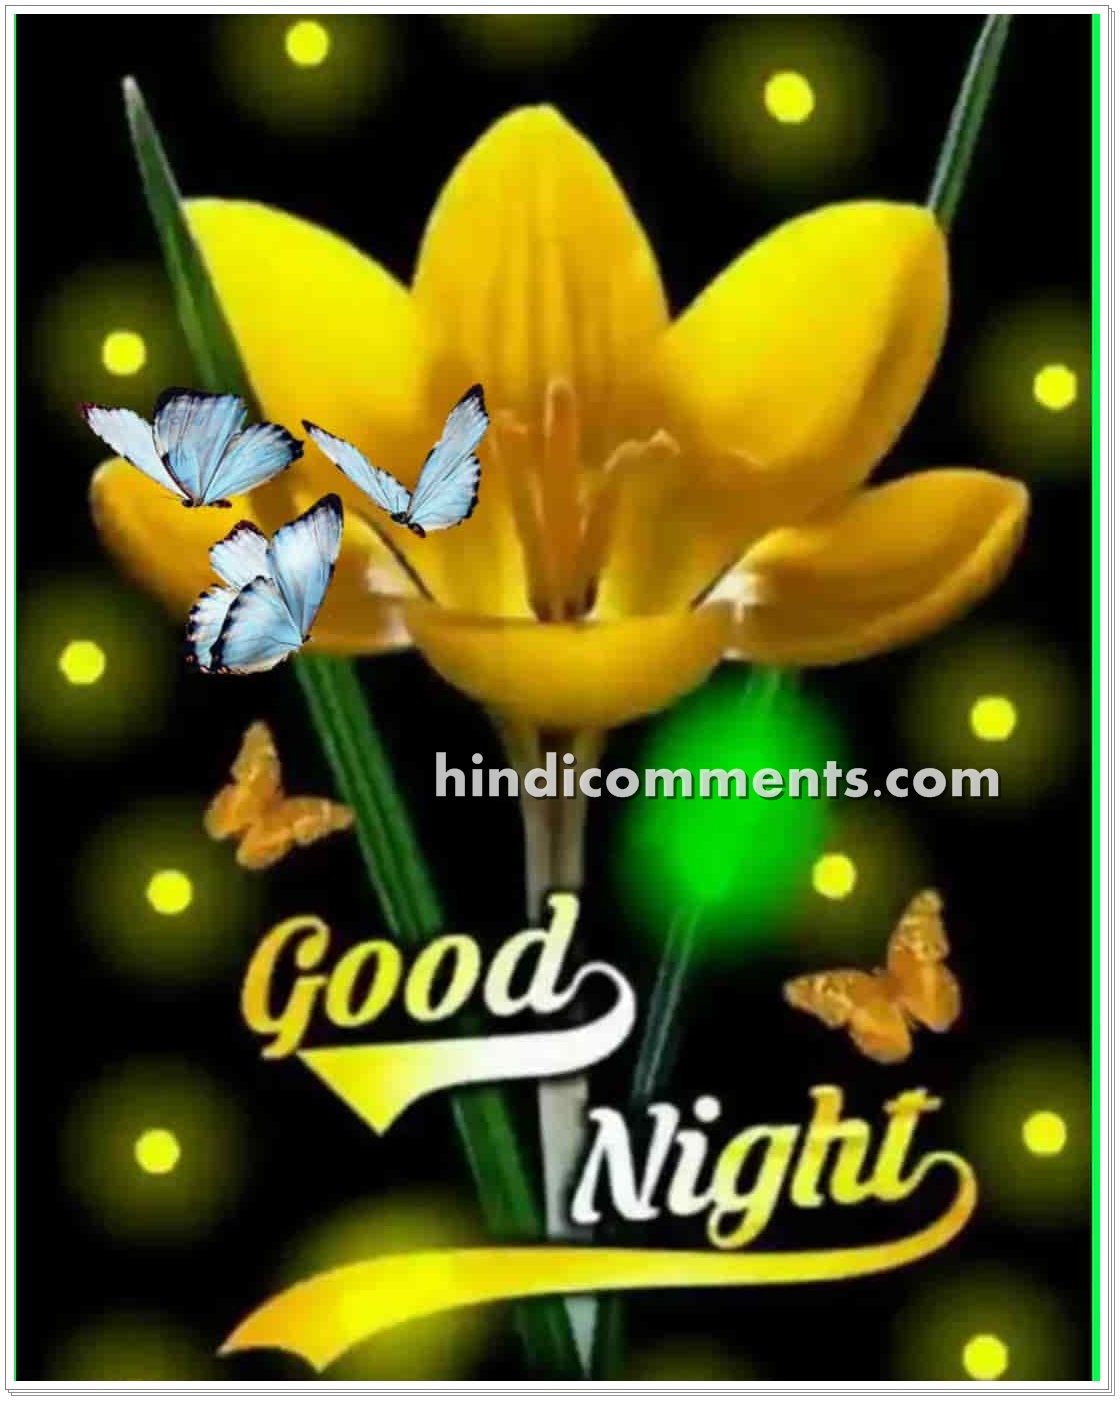 Good Night Wishes Images Status Pictures - Hindi Comments.Com